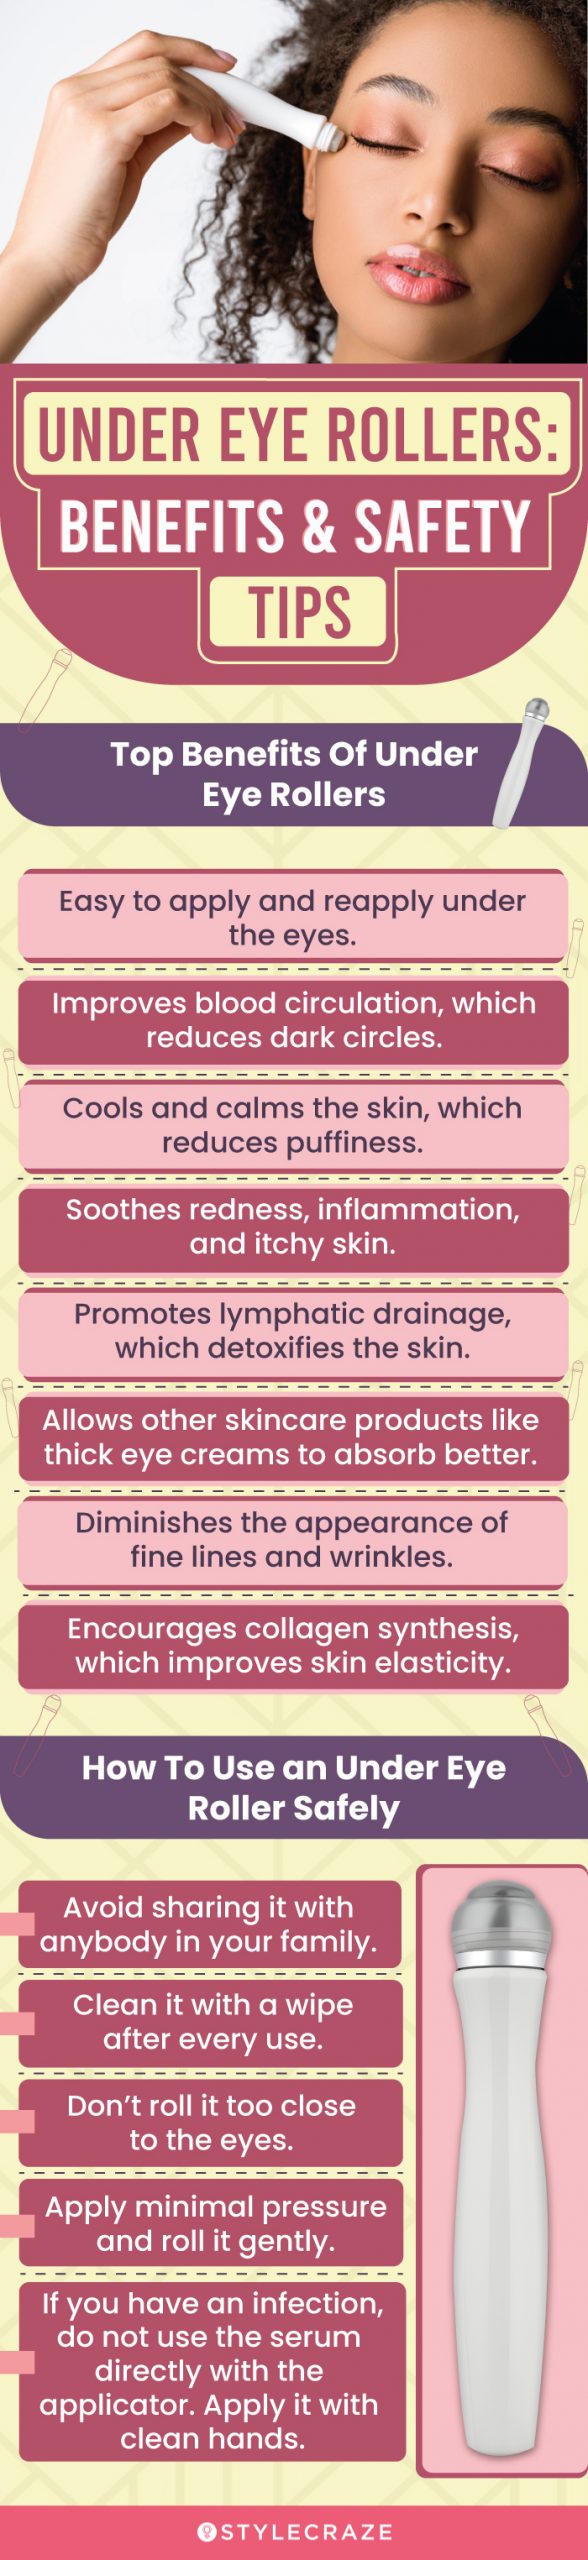 Under Eye Rollers: Benefits & Safety Tips (infographic)